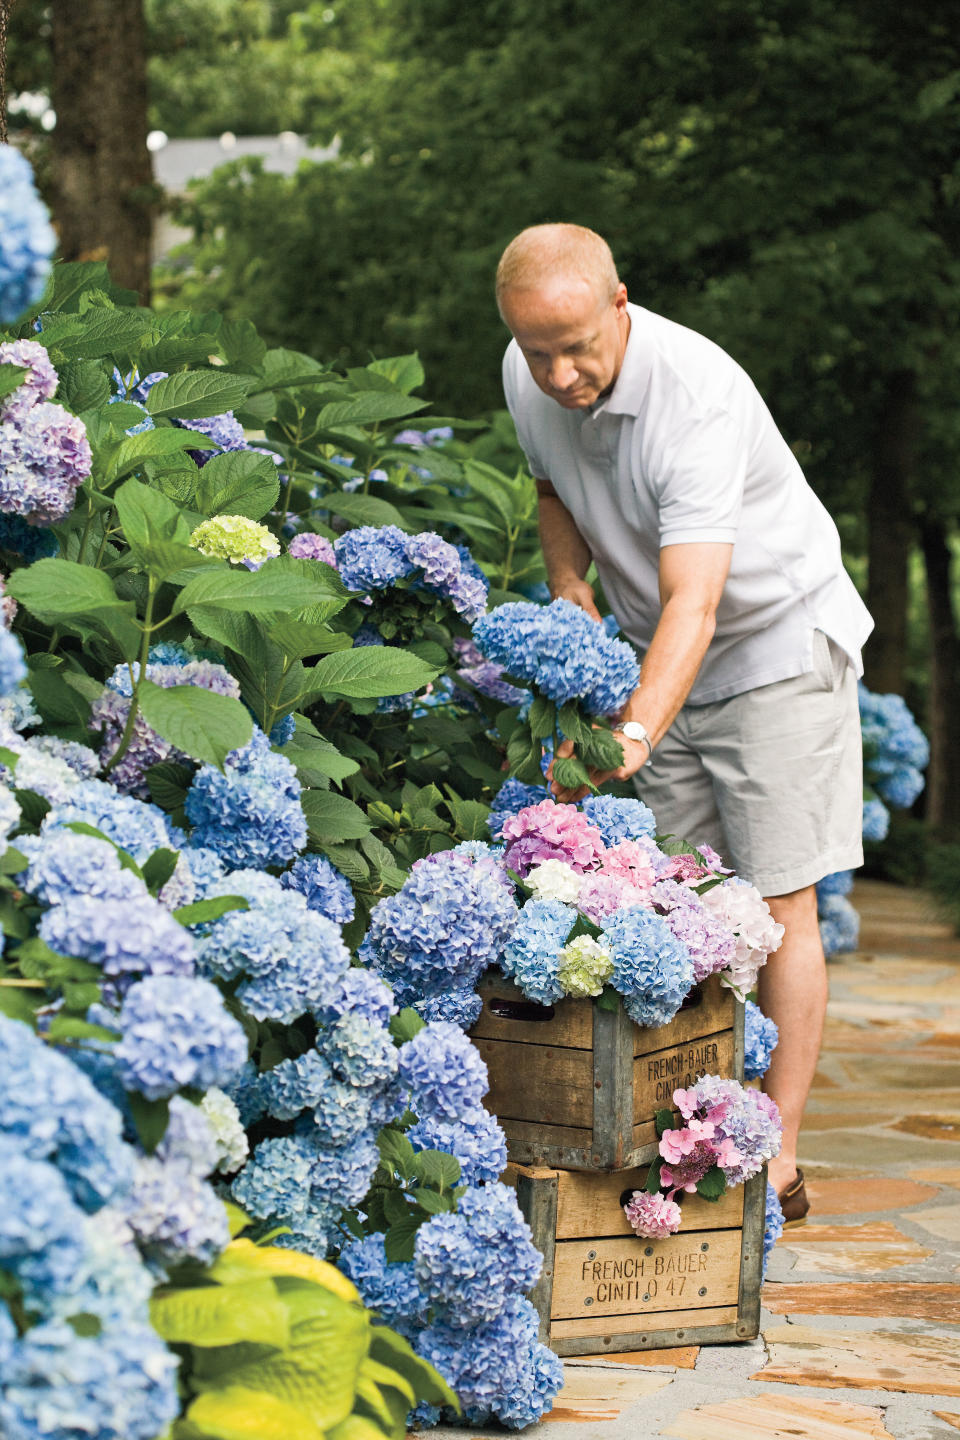 6. What’s the deal with reblooming hydrangeas?